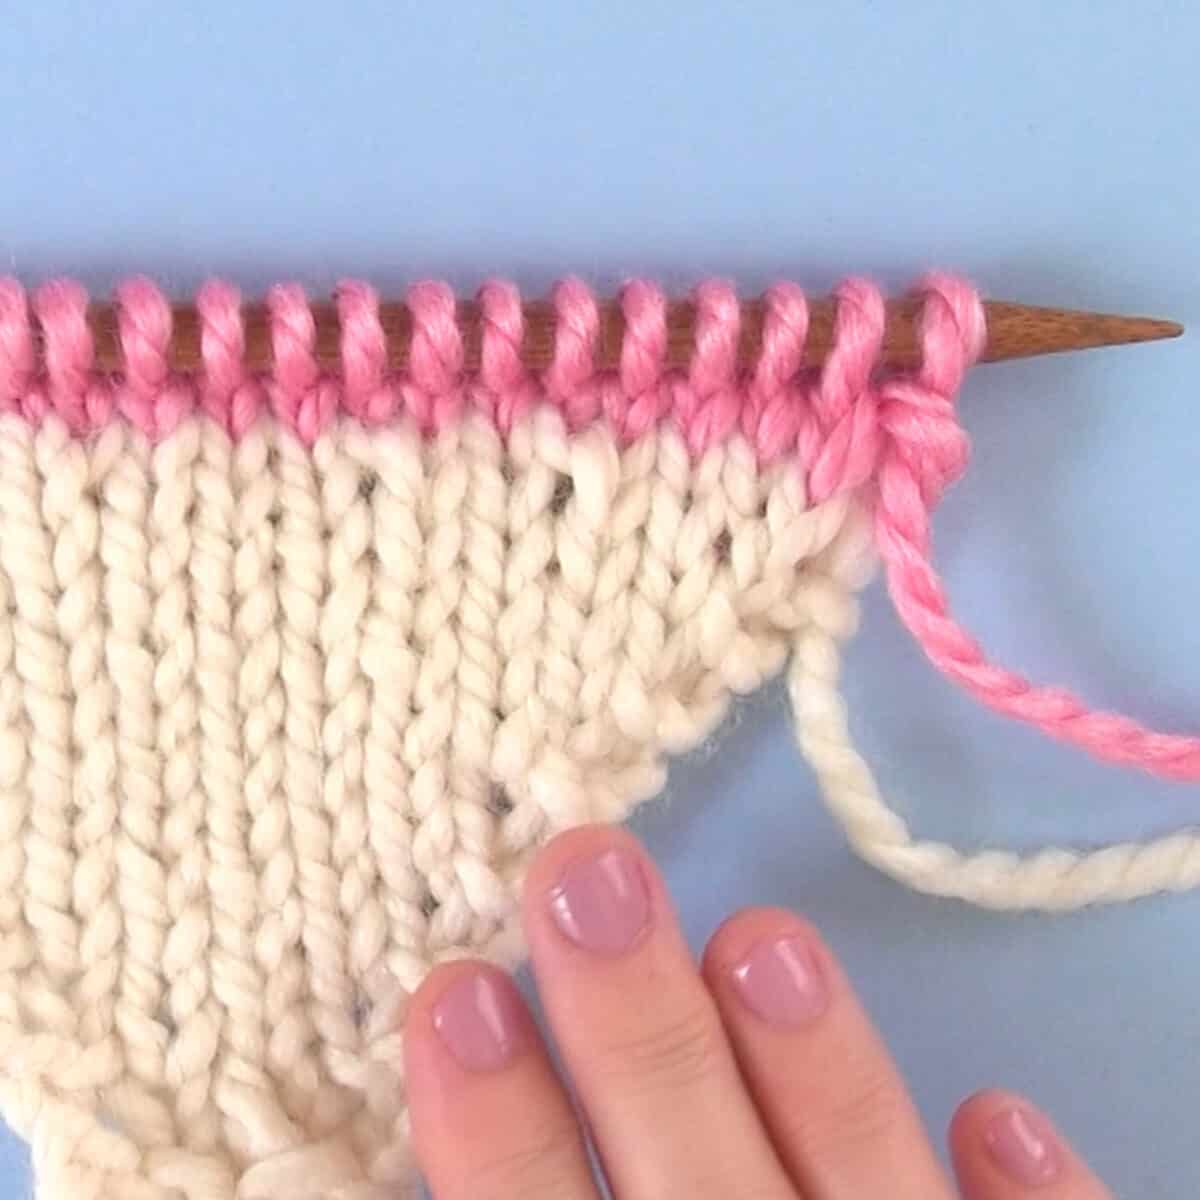 Make One Knitting Increase Sample in white and pink yarn with woman's hand